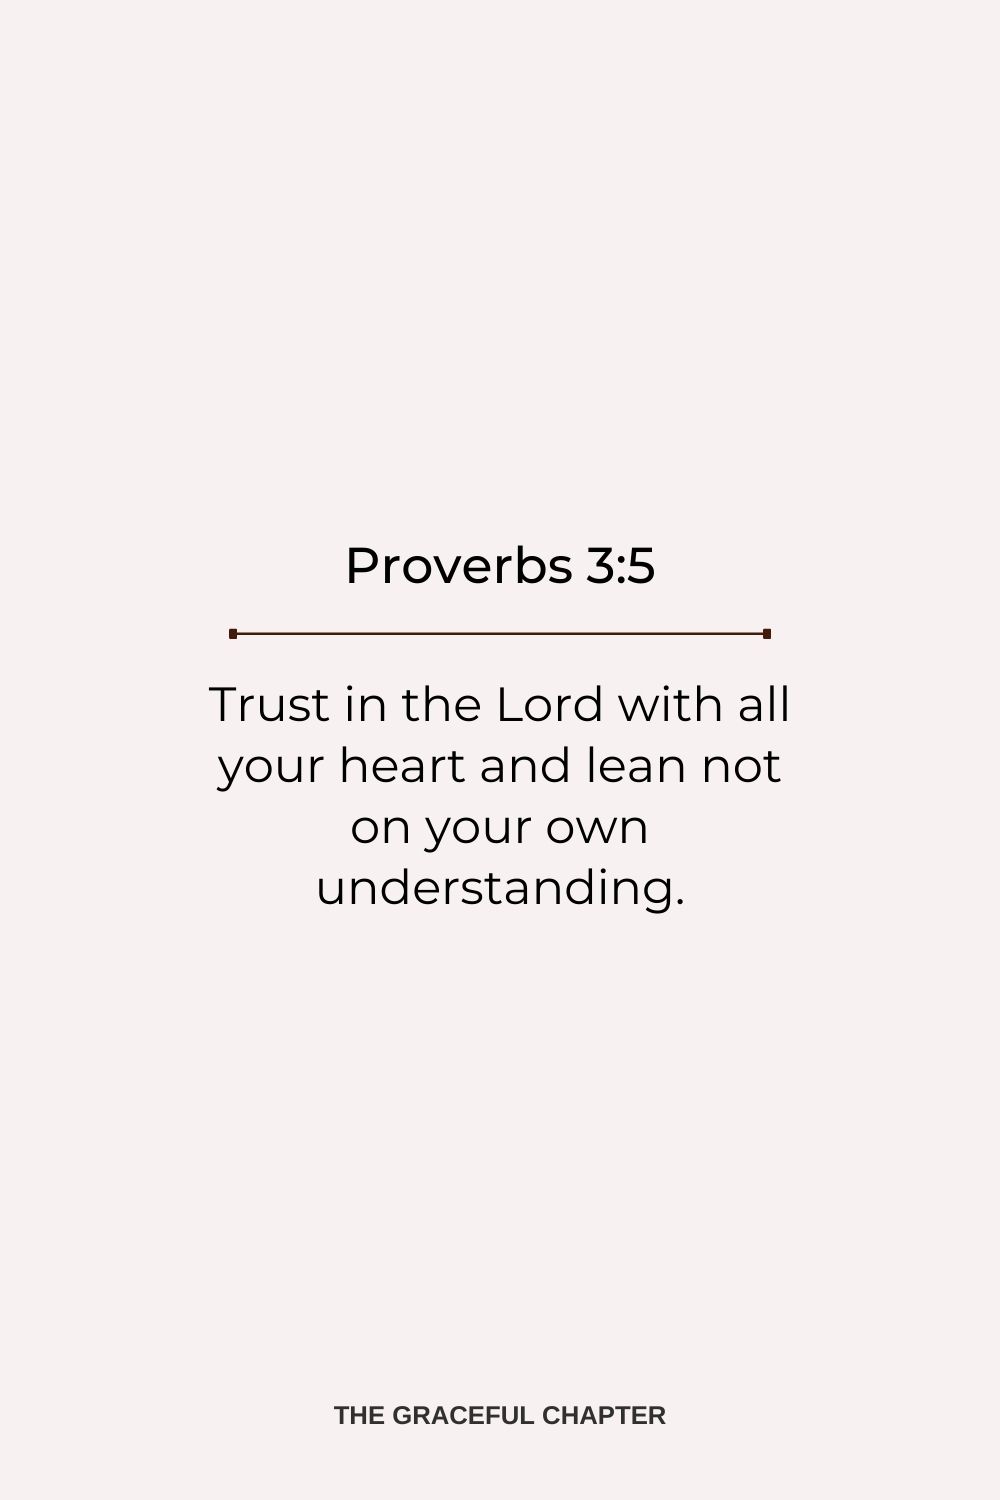 Trust in the Lord with all your heart and lean not on your own understanding. Proverbs 3:5